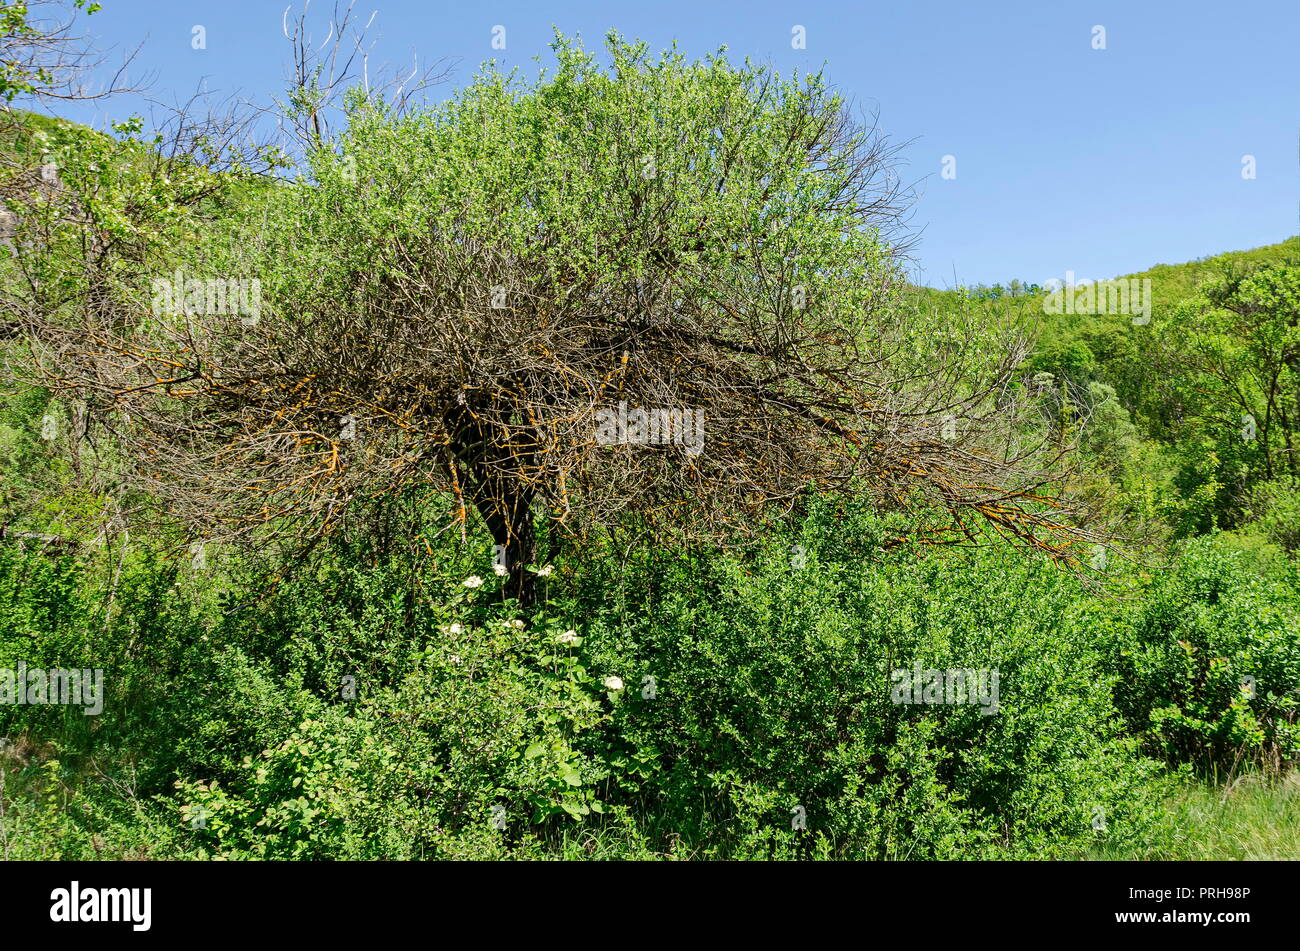 https://c8.alamy.com/comp/PRH98P/strange-landscape-of-springtime-nature-with-green-mix-forest-and-branche-covered-with-yellow-lichen-in-the-lozen-mountain-bulgaria-PRH98P.jpg